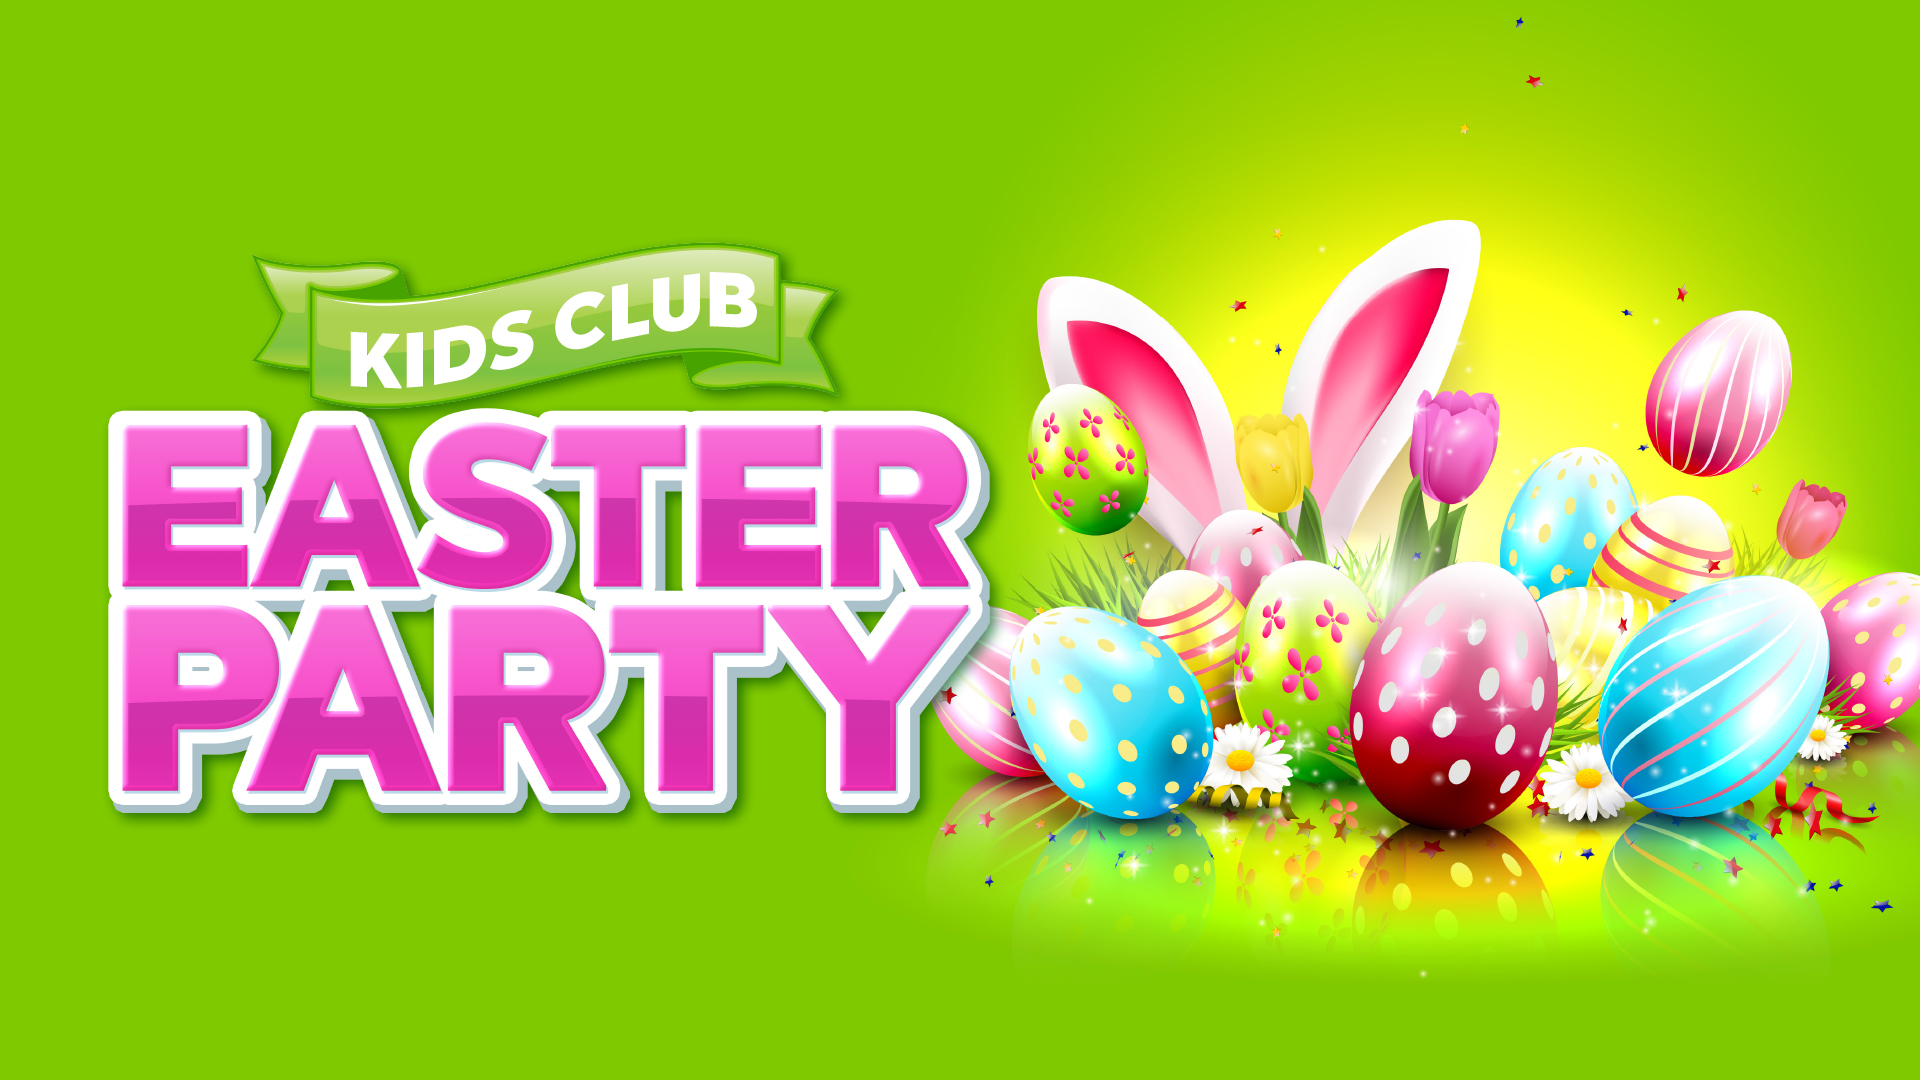 KIDS CLUB EASTER PARTY